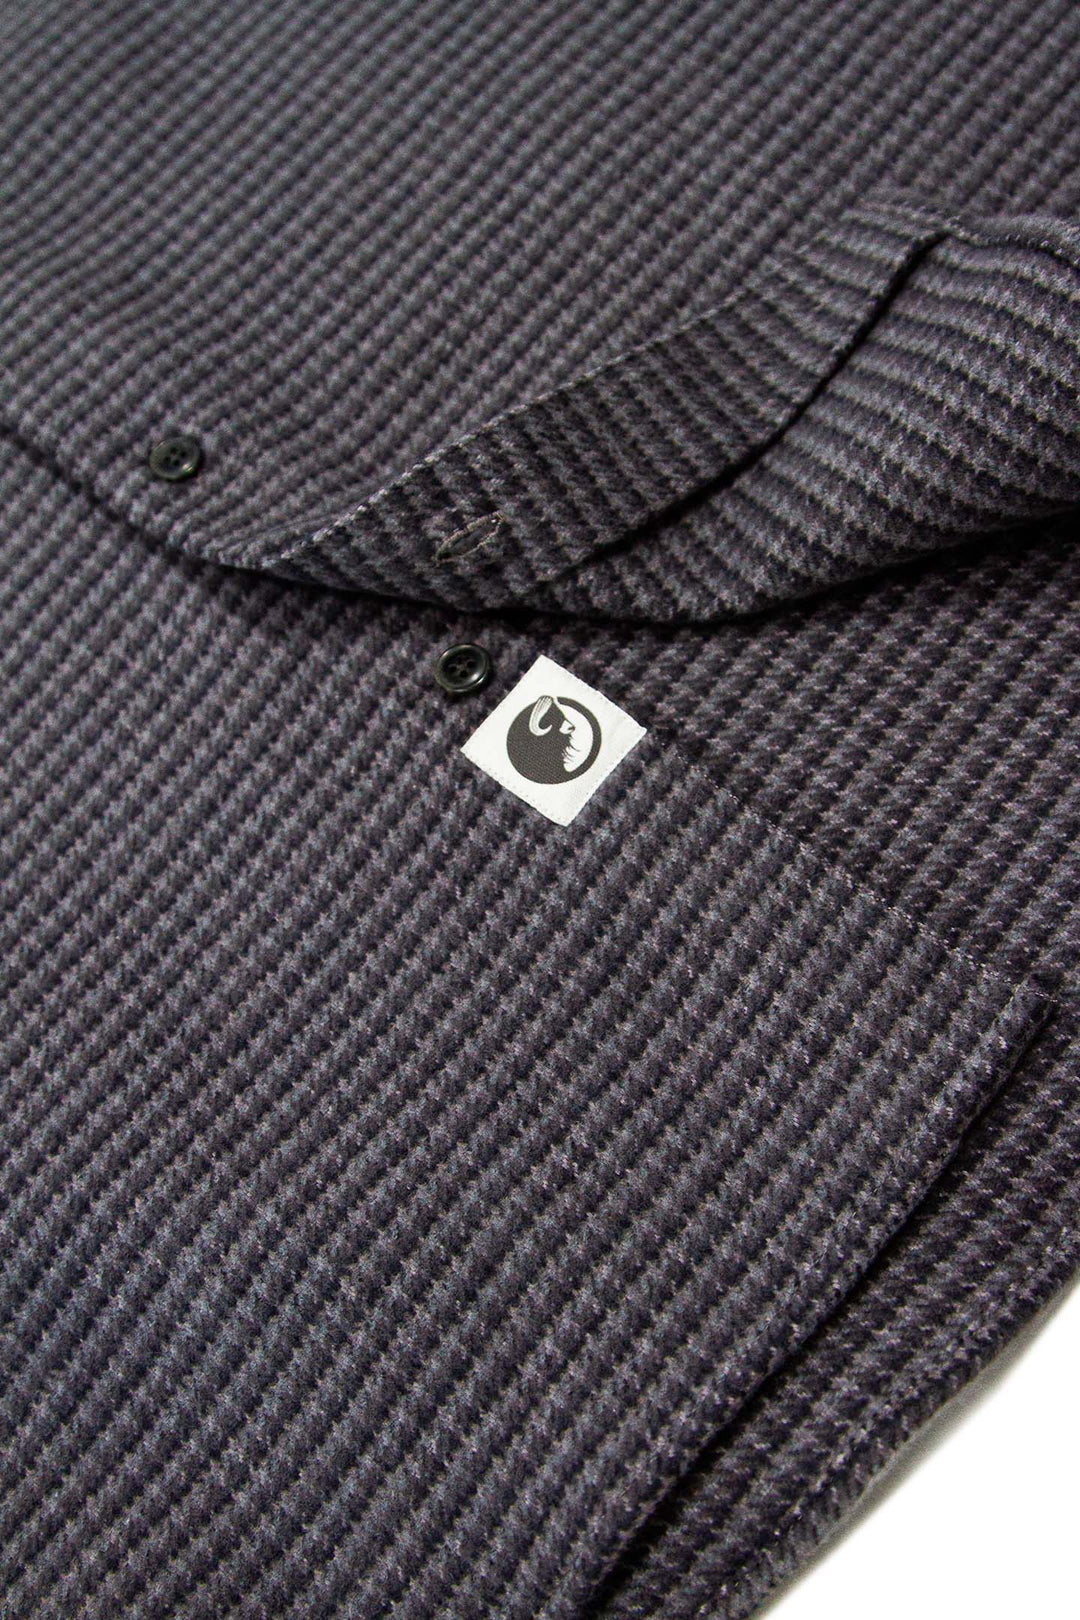 Relaxed fitting charcoal grey flannel shirt for men by MuskOx Flannels, made with 100% heavyweight cotton